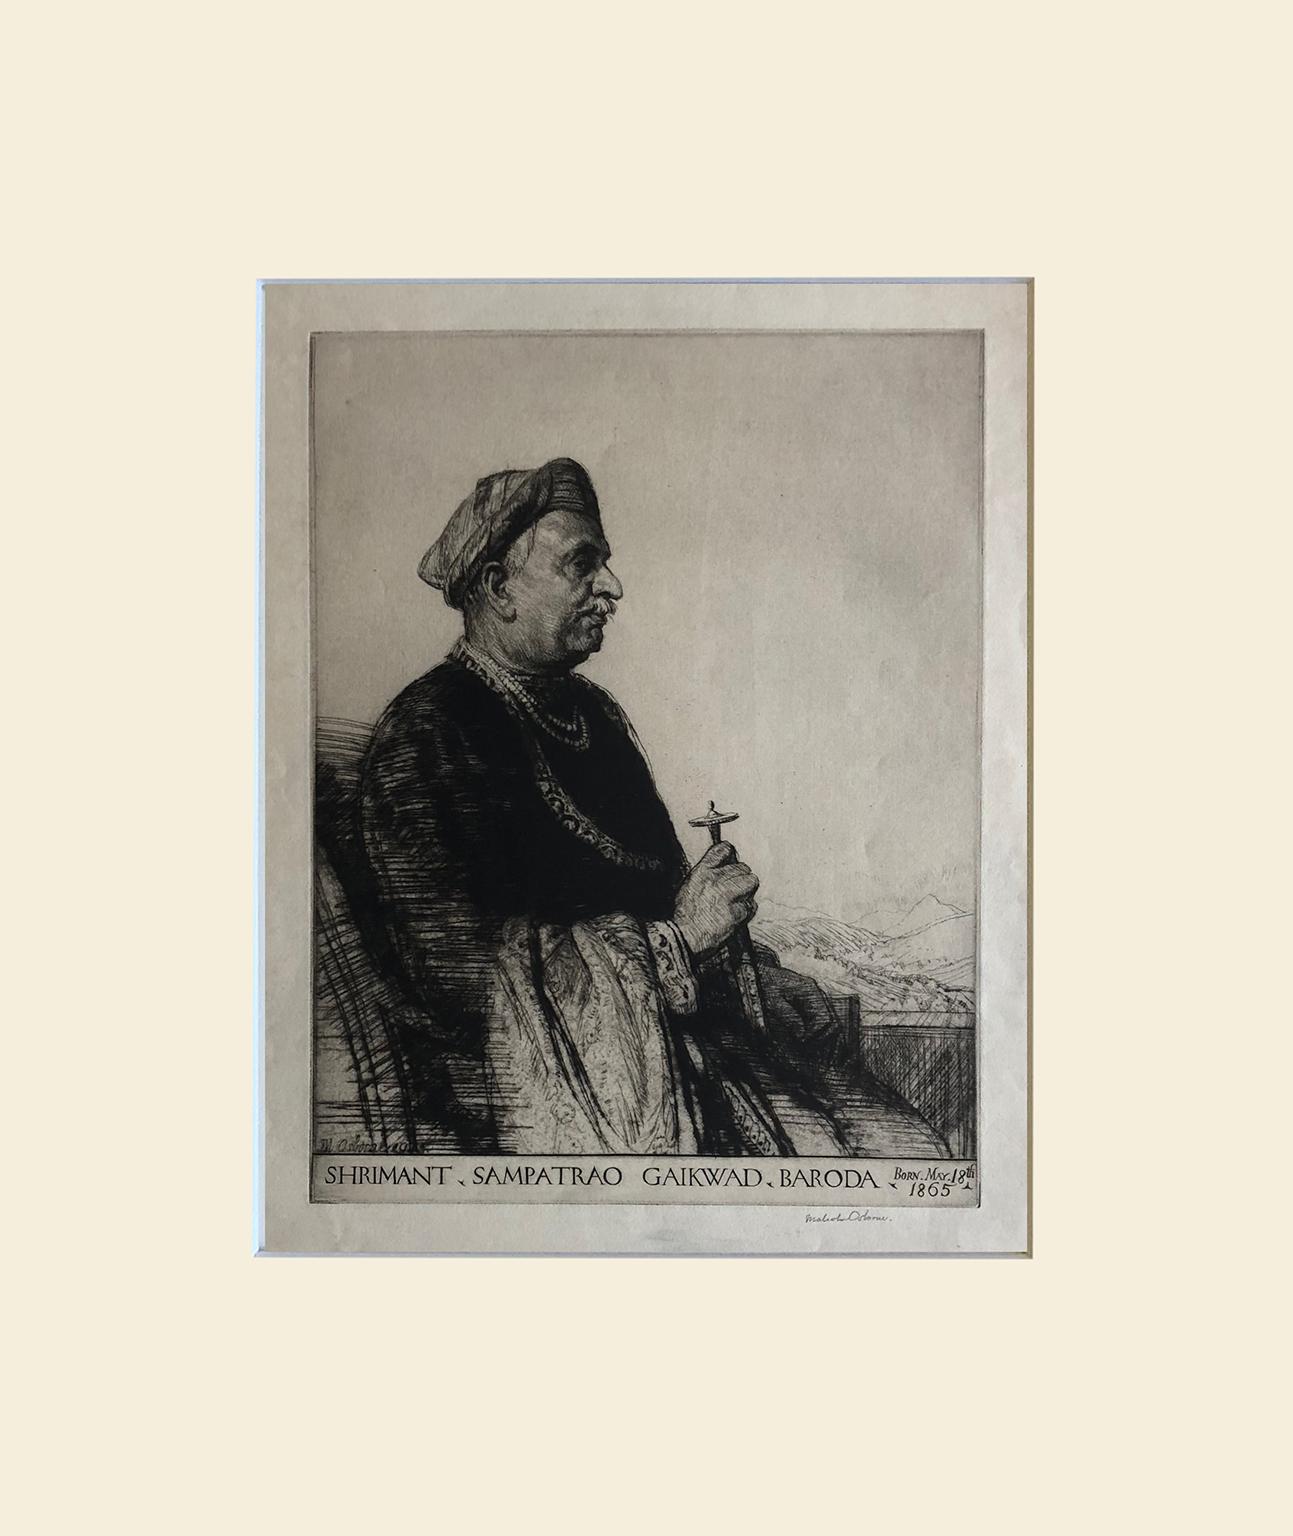 Malcolm Osbourne PRA (British, 1880-1963), Shrimant Sampatrao, Gaekwad of Baroda 
etching on paper, signed and dated 1923 lower left, inscribed in lower border Shrimant Sampatrao Gaikwad Baroda, Born May 18th 1865. Also signed lower right in